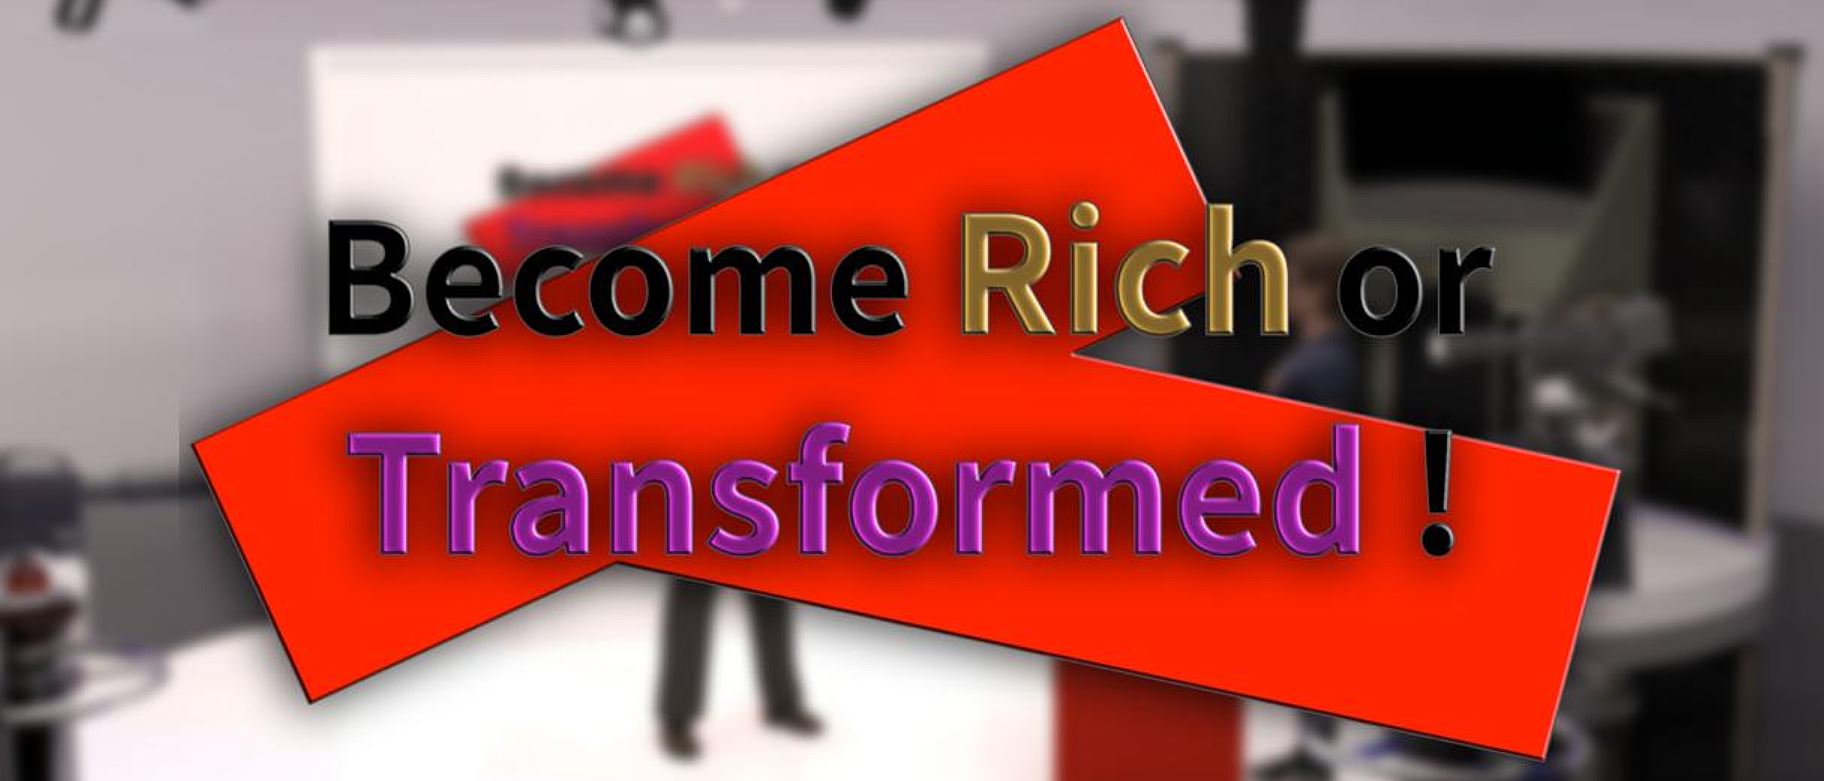 [Stripboek] Become Rich or Transformed